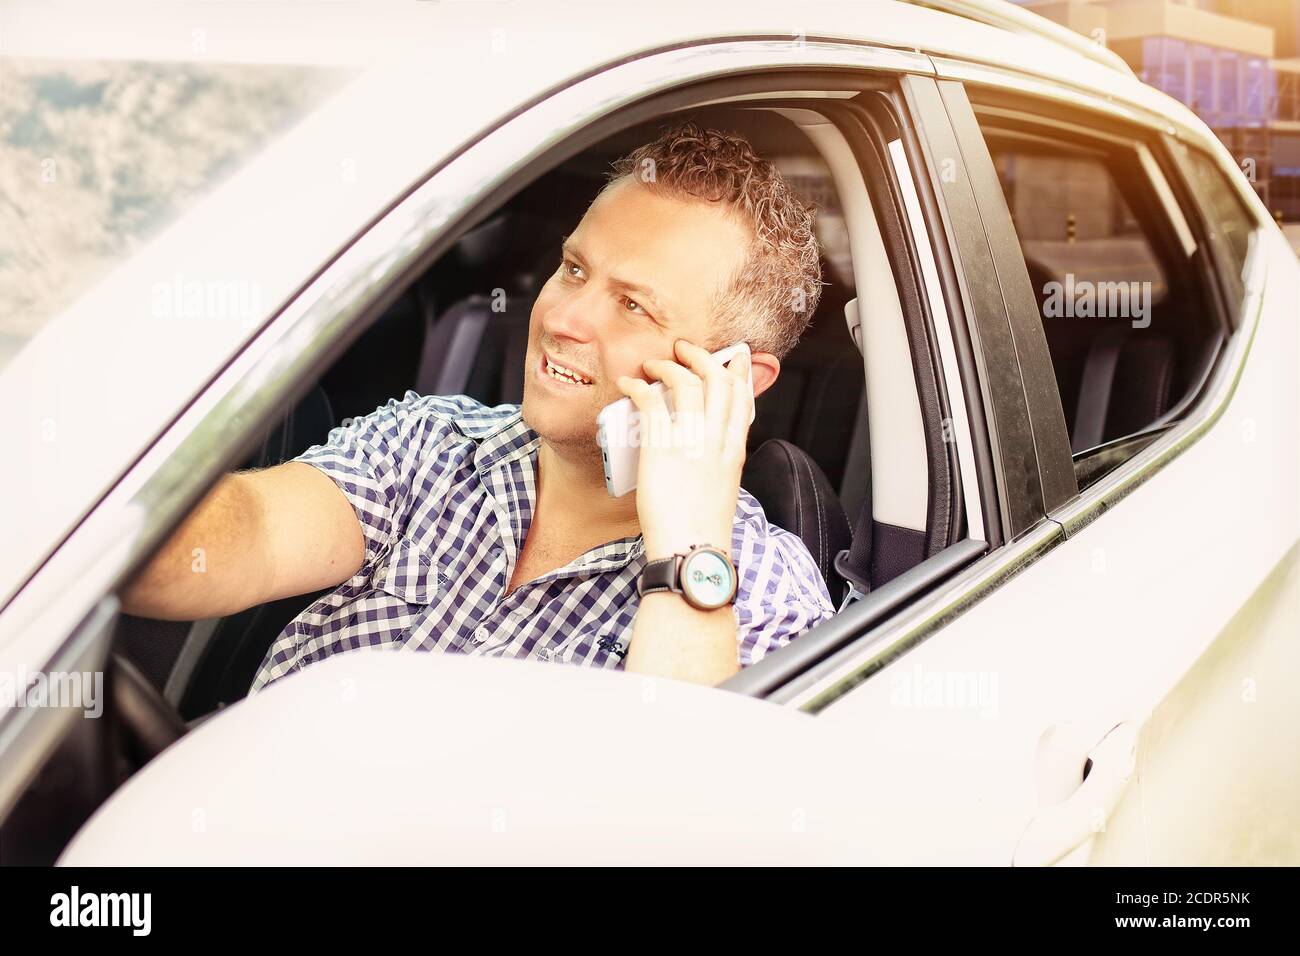 man uses a mobile phone while driving a car Stock Photo